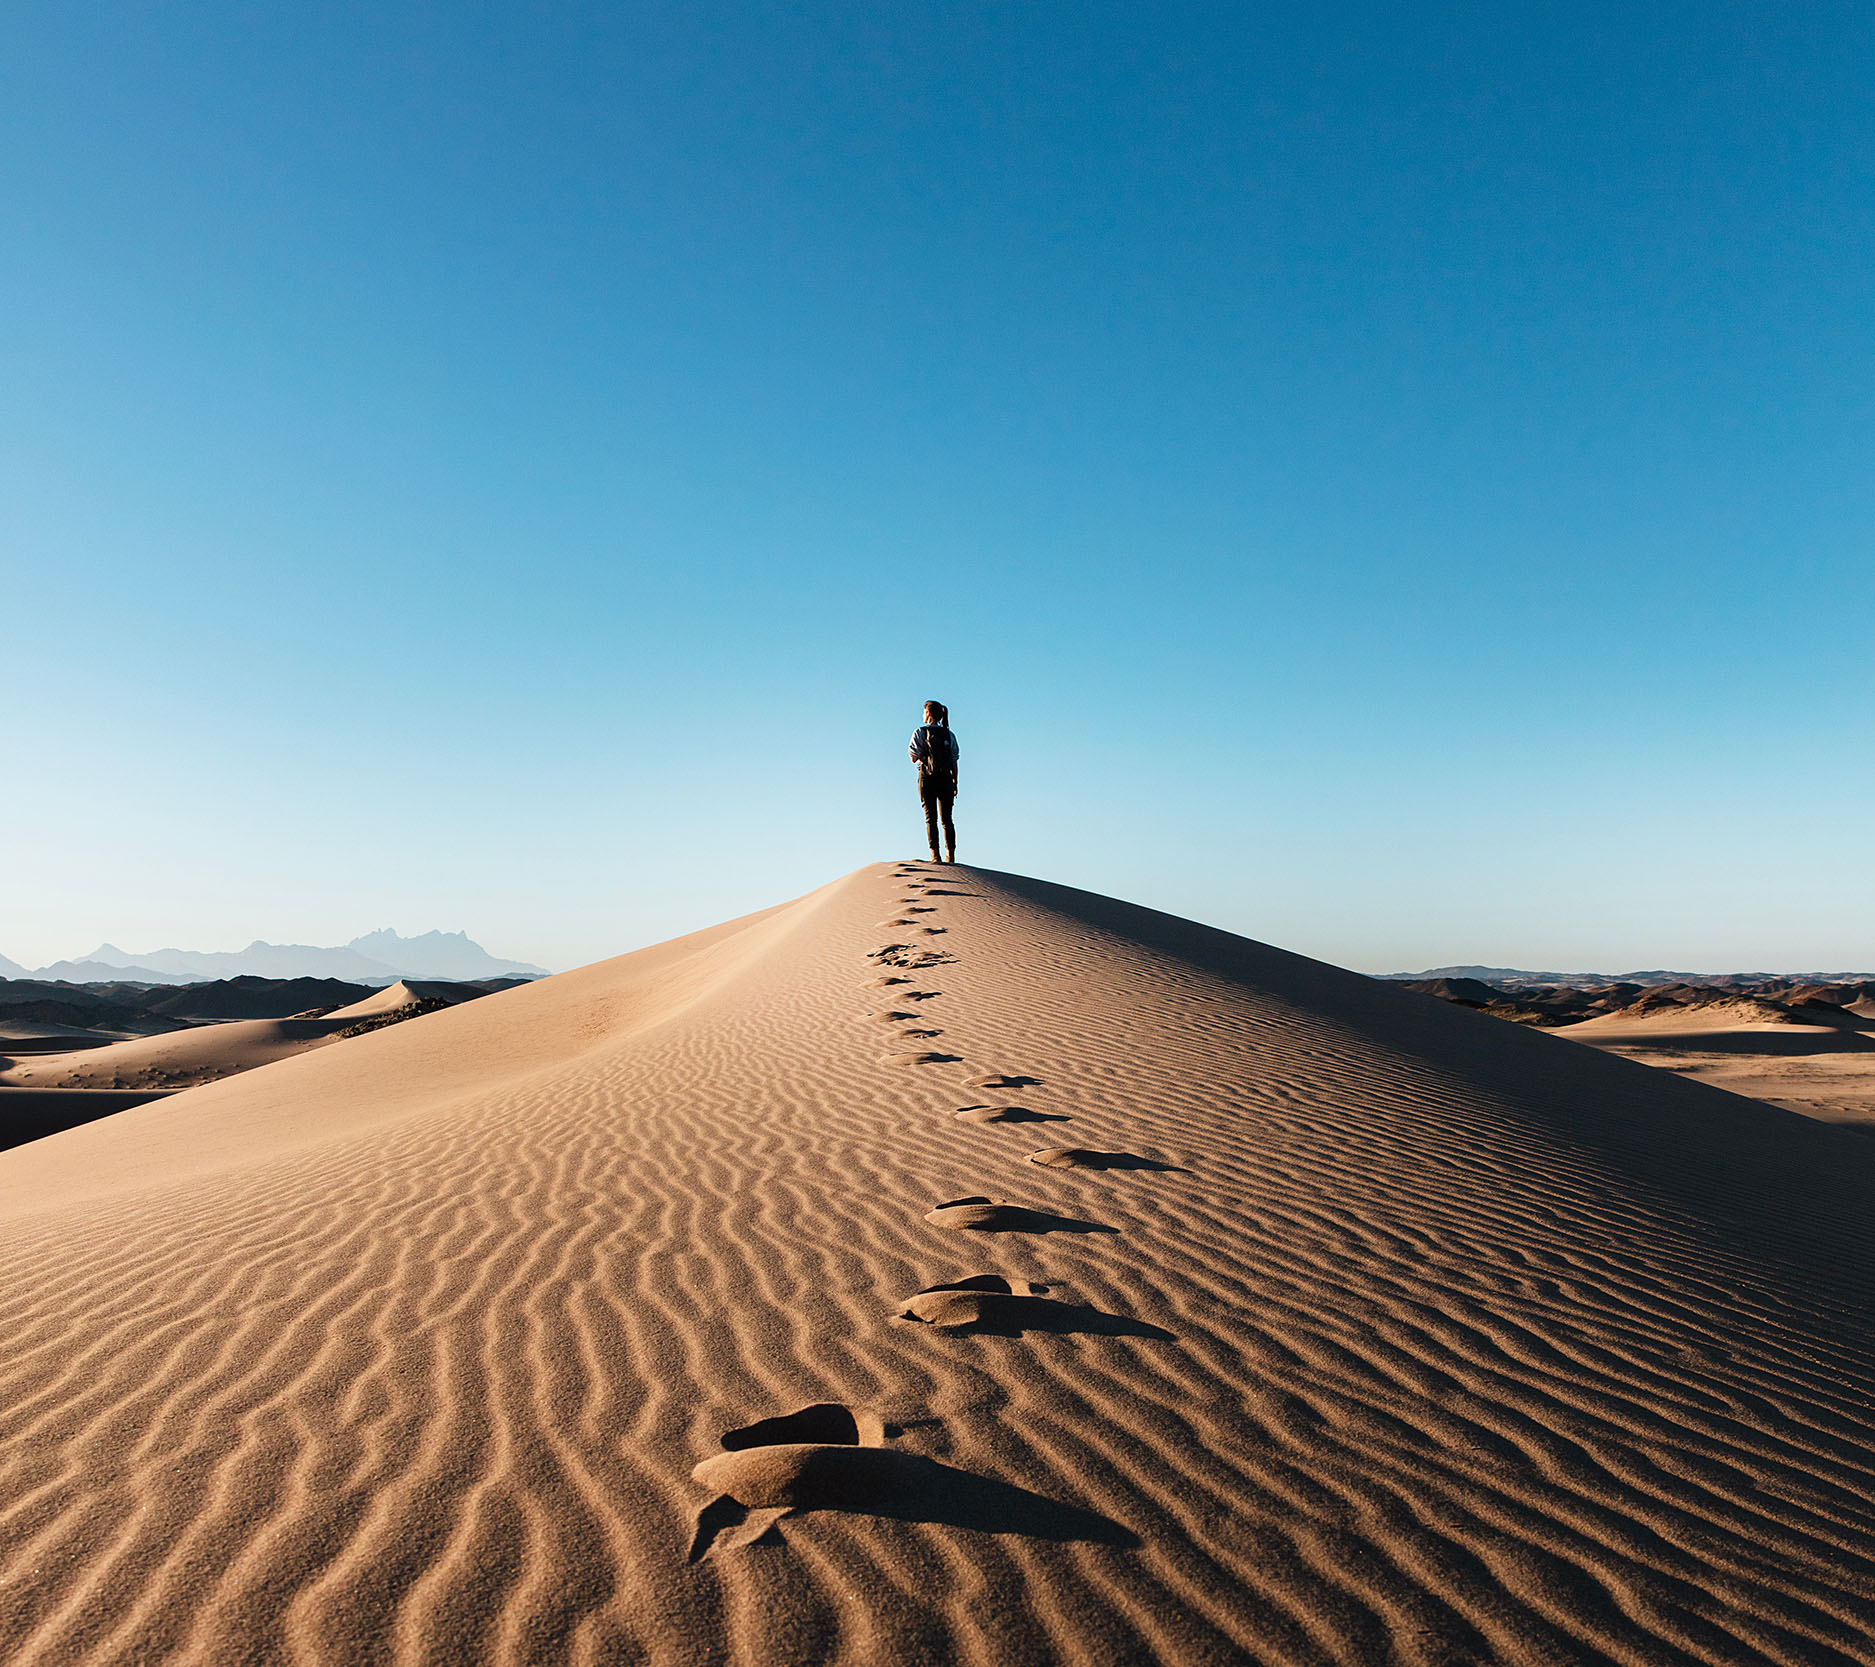 Sheaff Brock in the news, Dave Gilreath publications for Medical Economics, far-off shot of a person standing on a sand dune with a trail of footprints in the sand